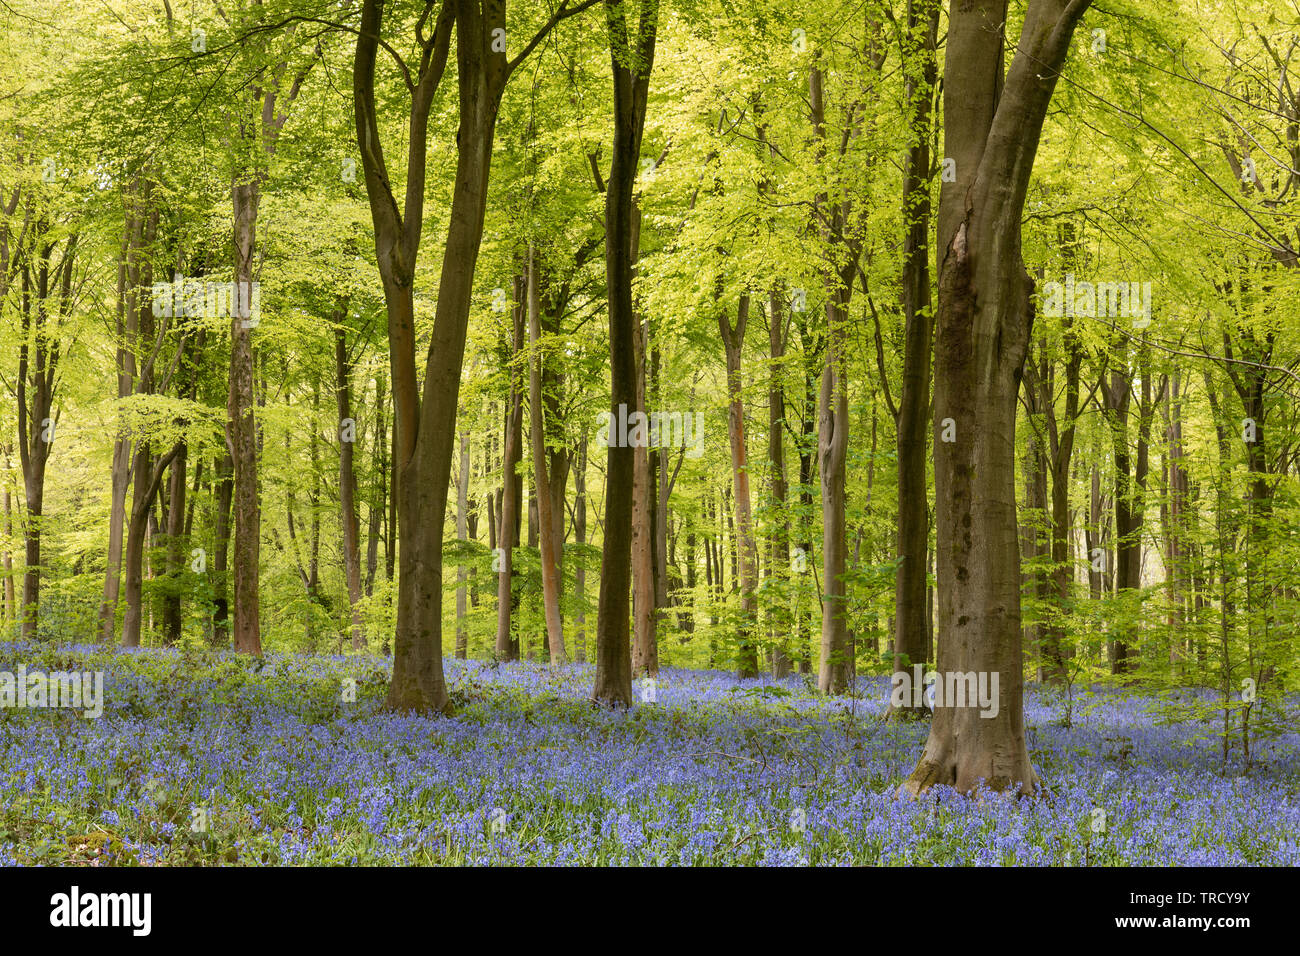 Spring leaves on the beech trees and bluebells - Hyacinthoides non scripta flowering at West Woods bluebell wood, Near Marlborough, Wiltshire, England Stock Photo